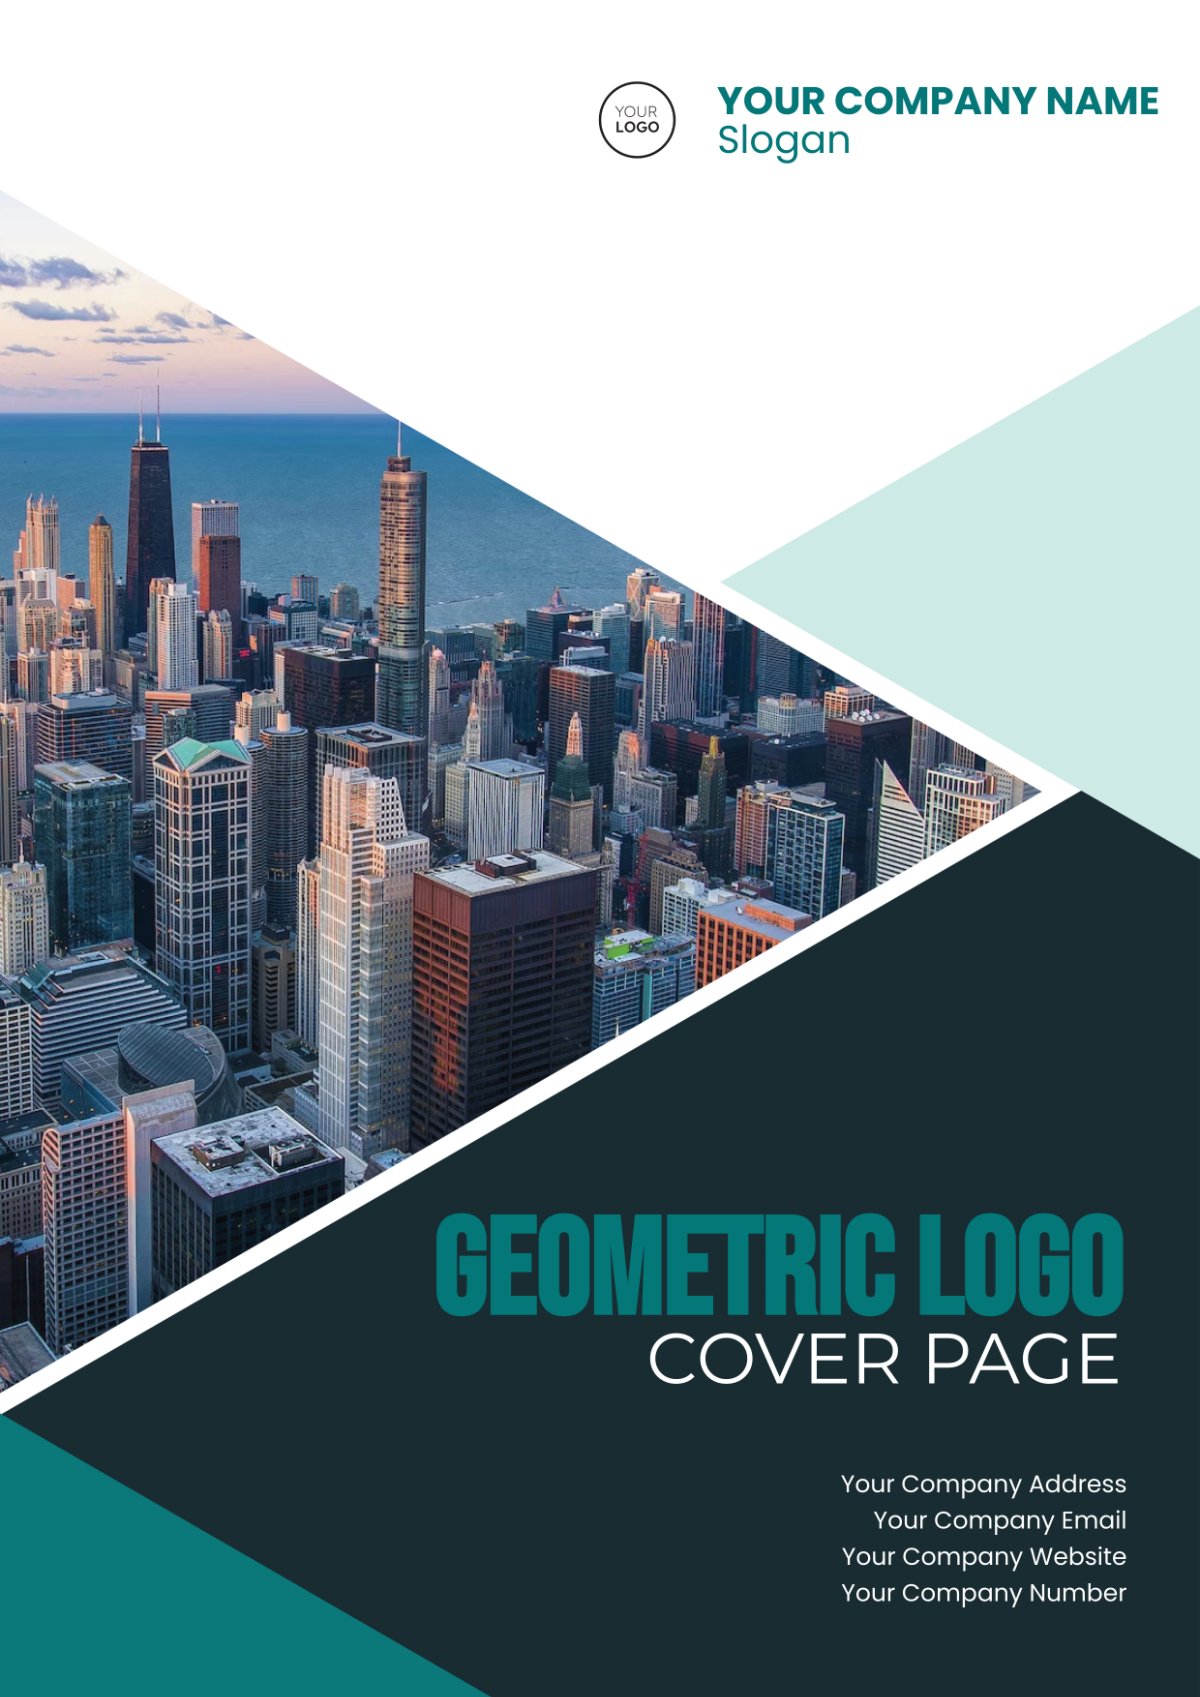 Geometric Logo Cover Page